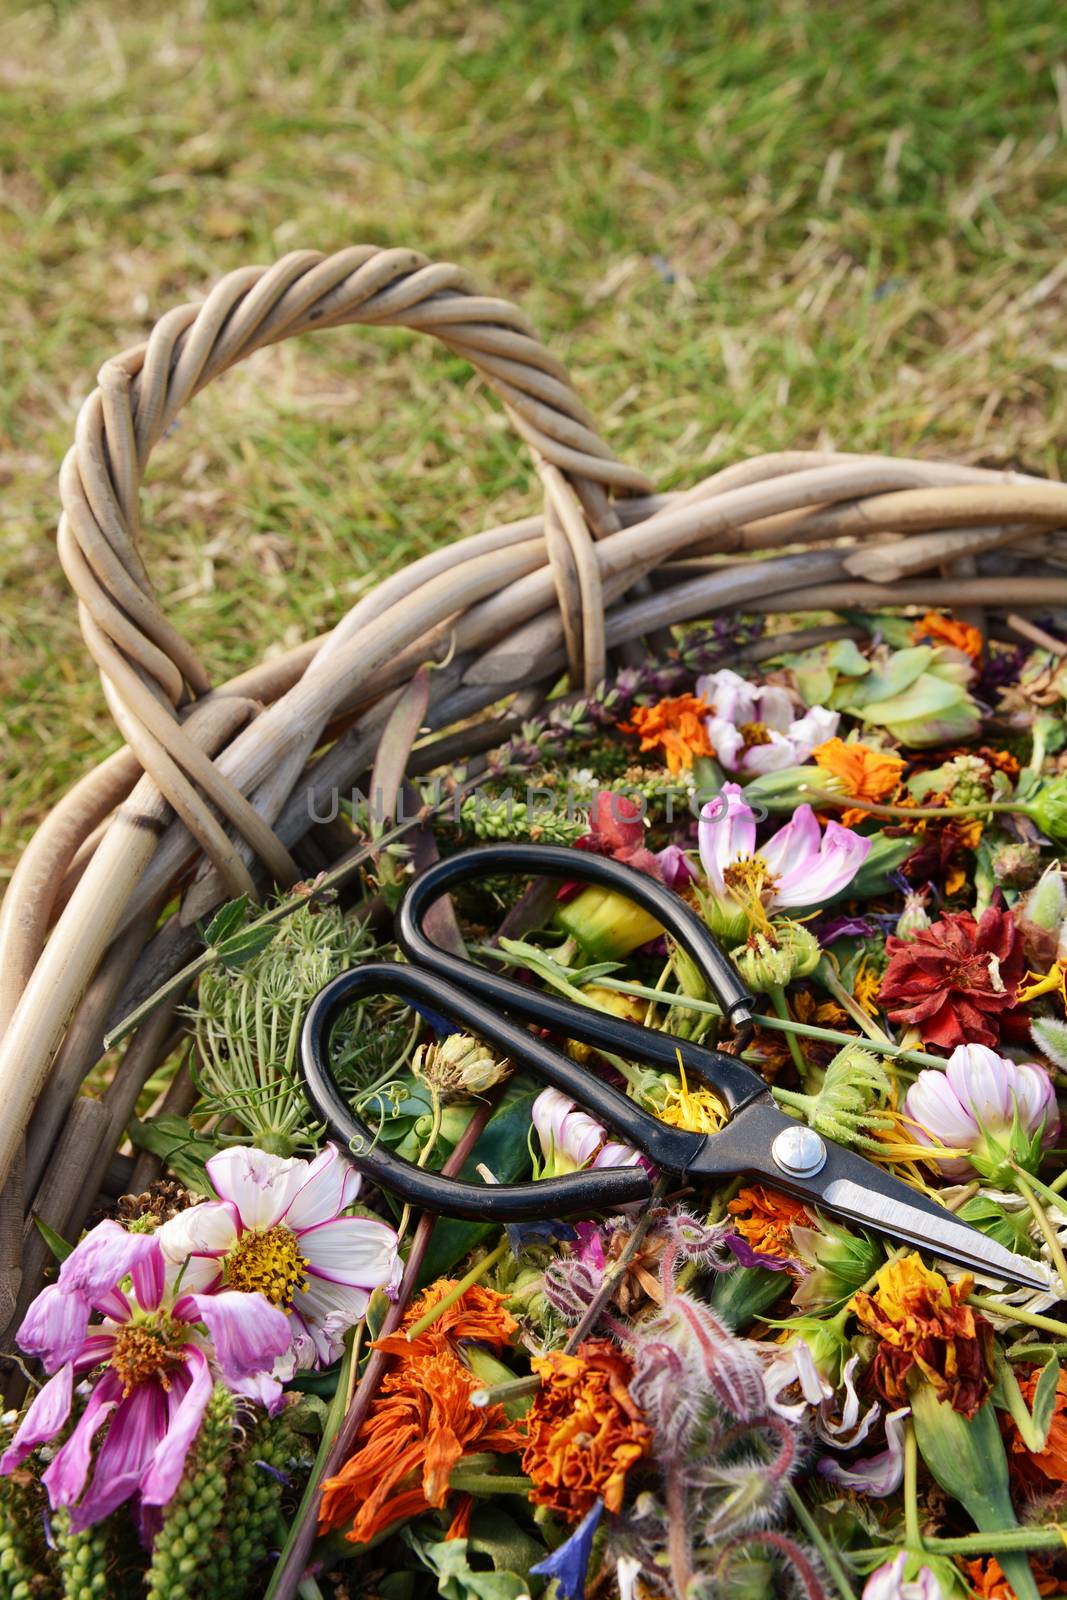 Basket of dead flowers and seed heads with florist scissors  by sarahdoow